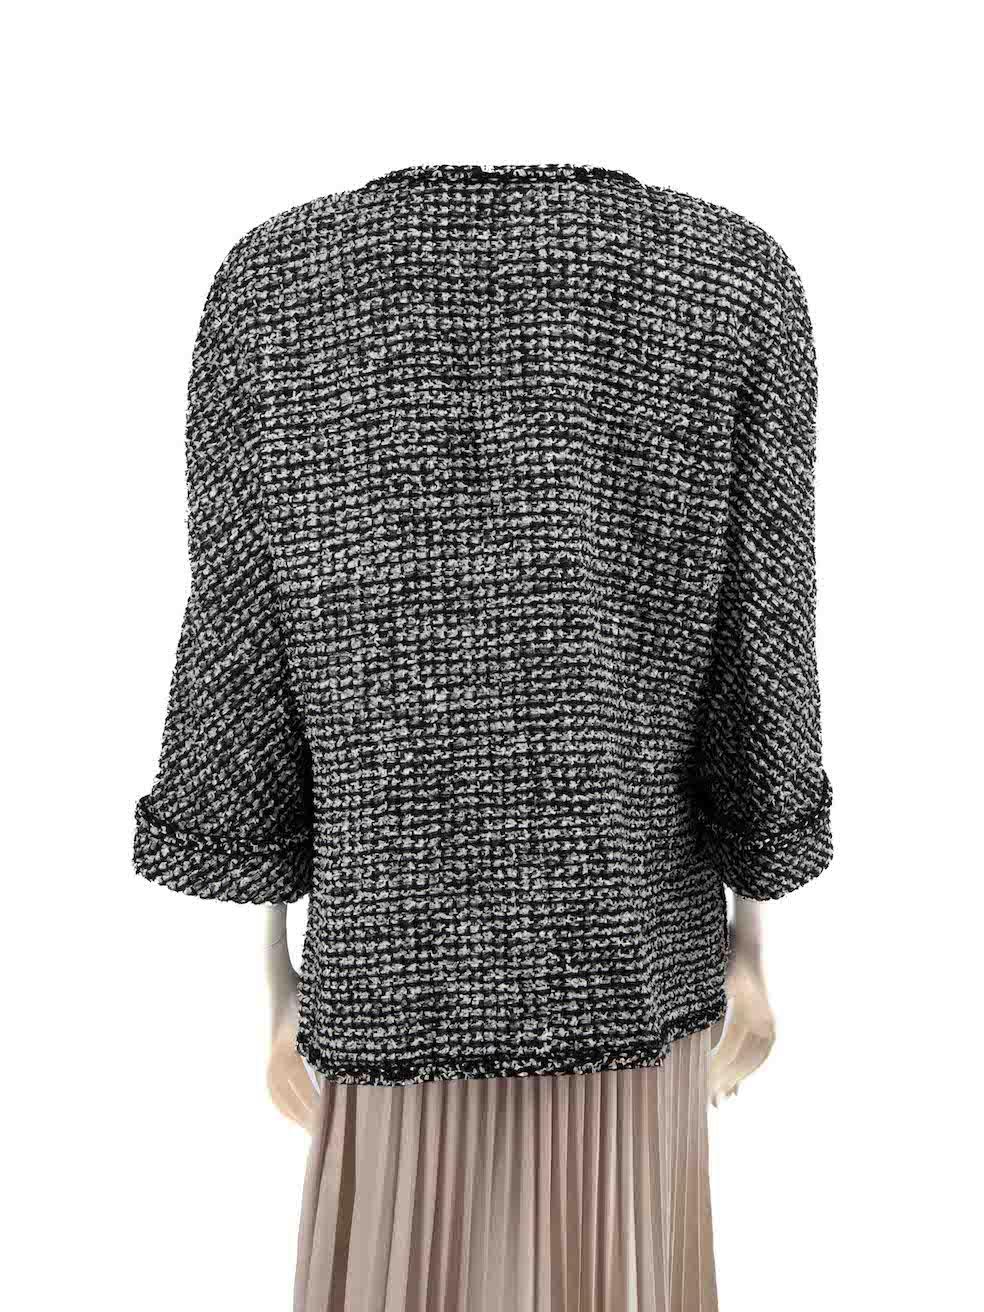 Chanel 2014 Black Tweed Double Breasted Jacket Size 4XL In Good Condition For Sale In London, GB